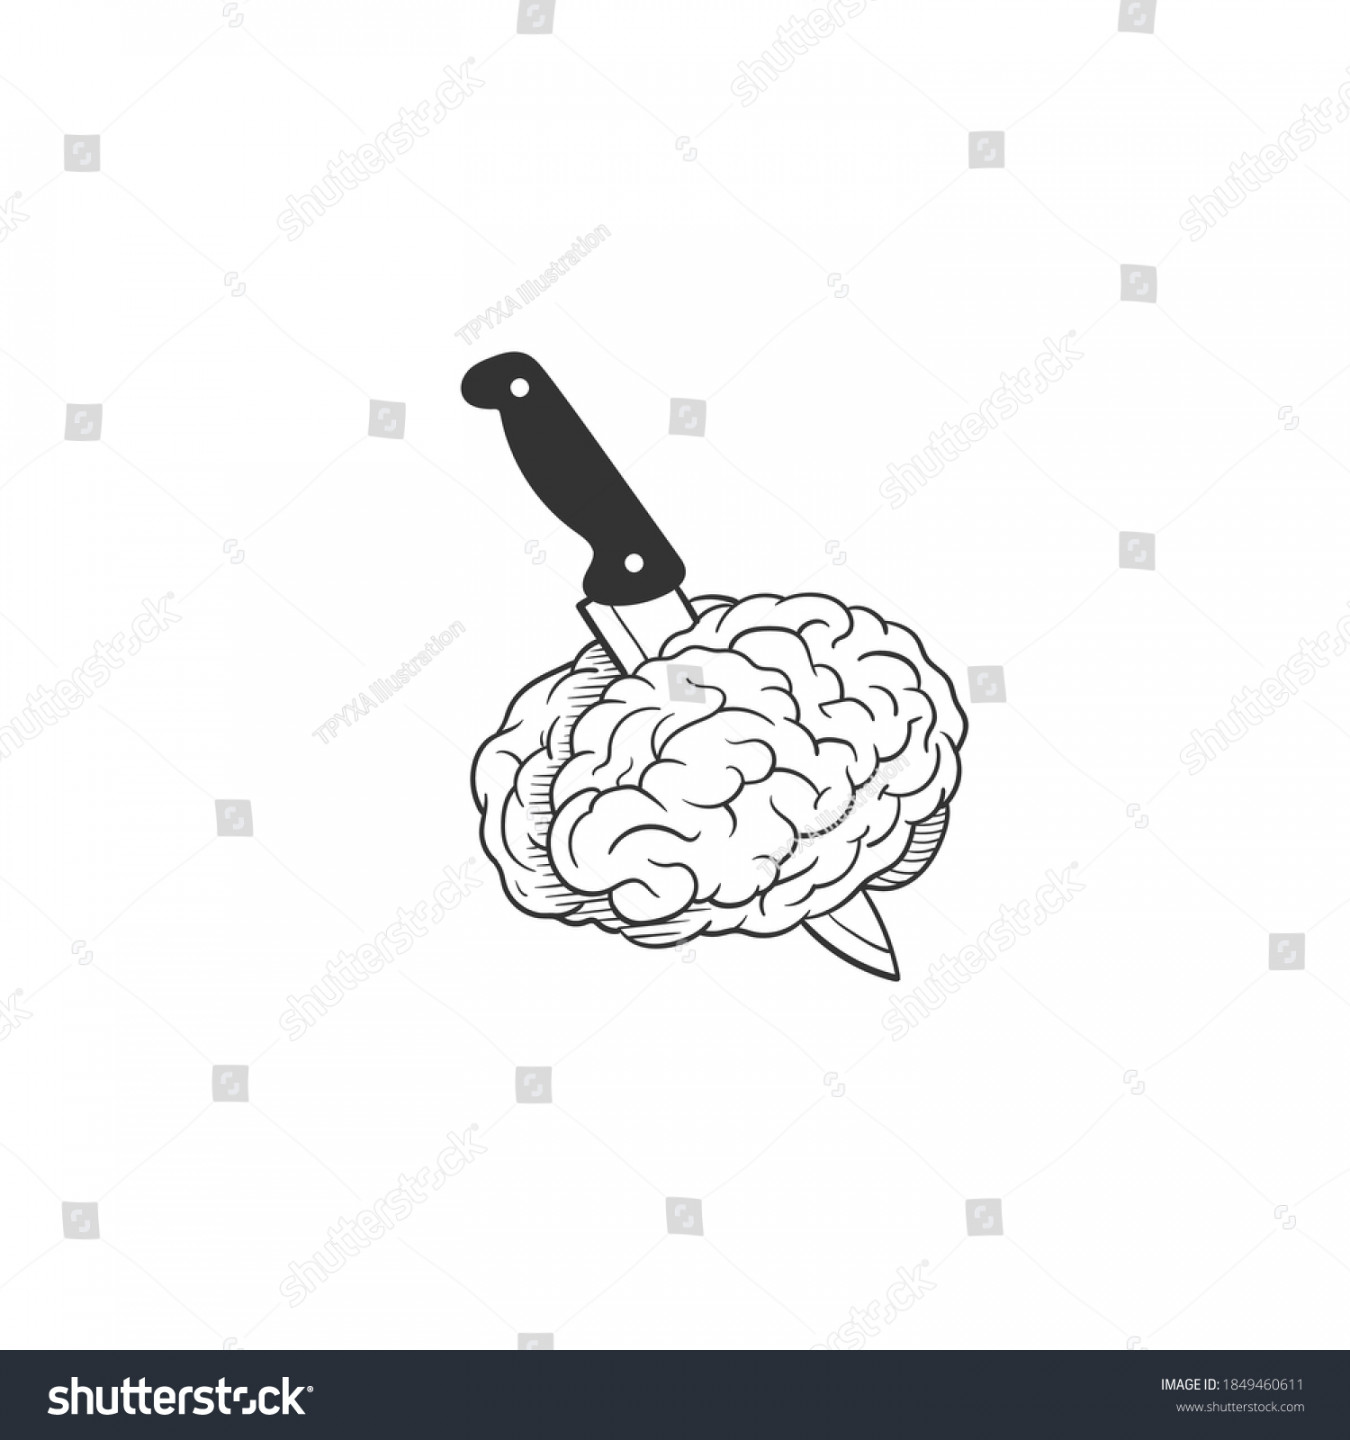 Brain Knife Can Be Used Sketch Stock Vector (Royalty Free